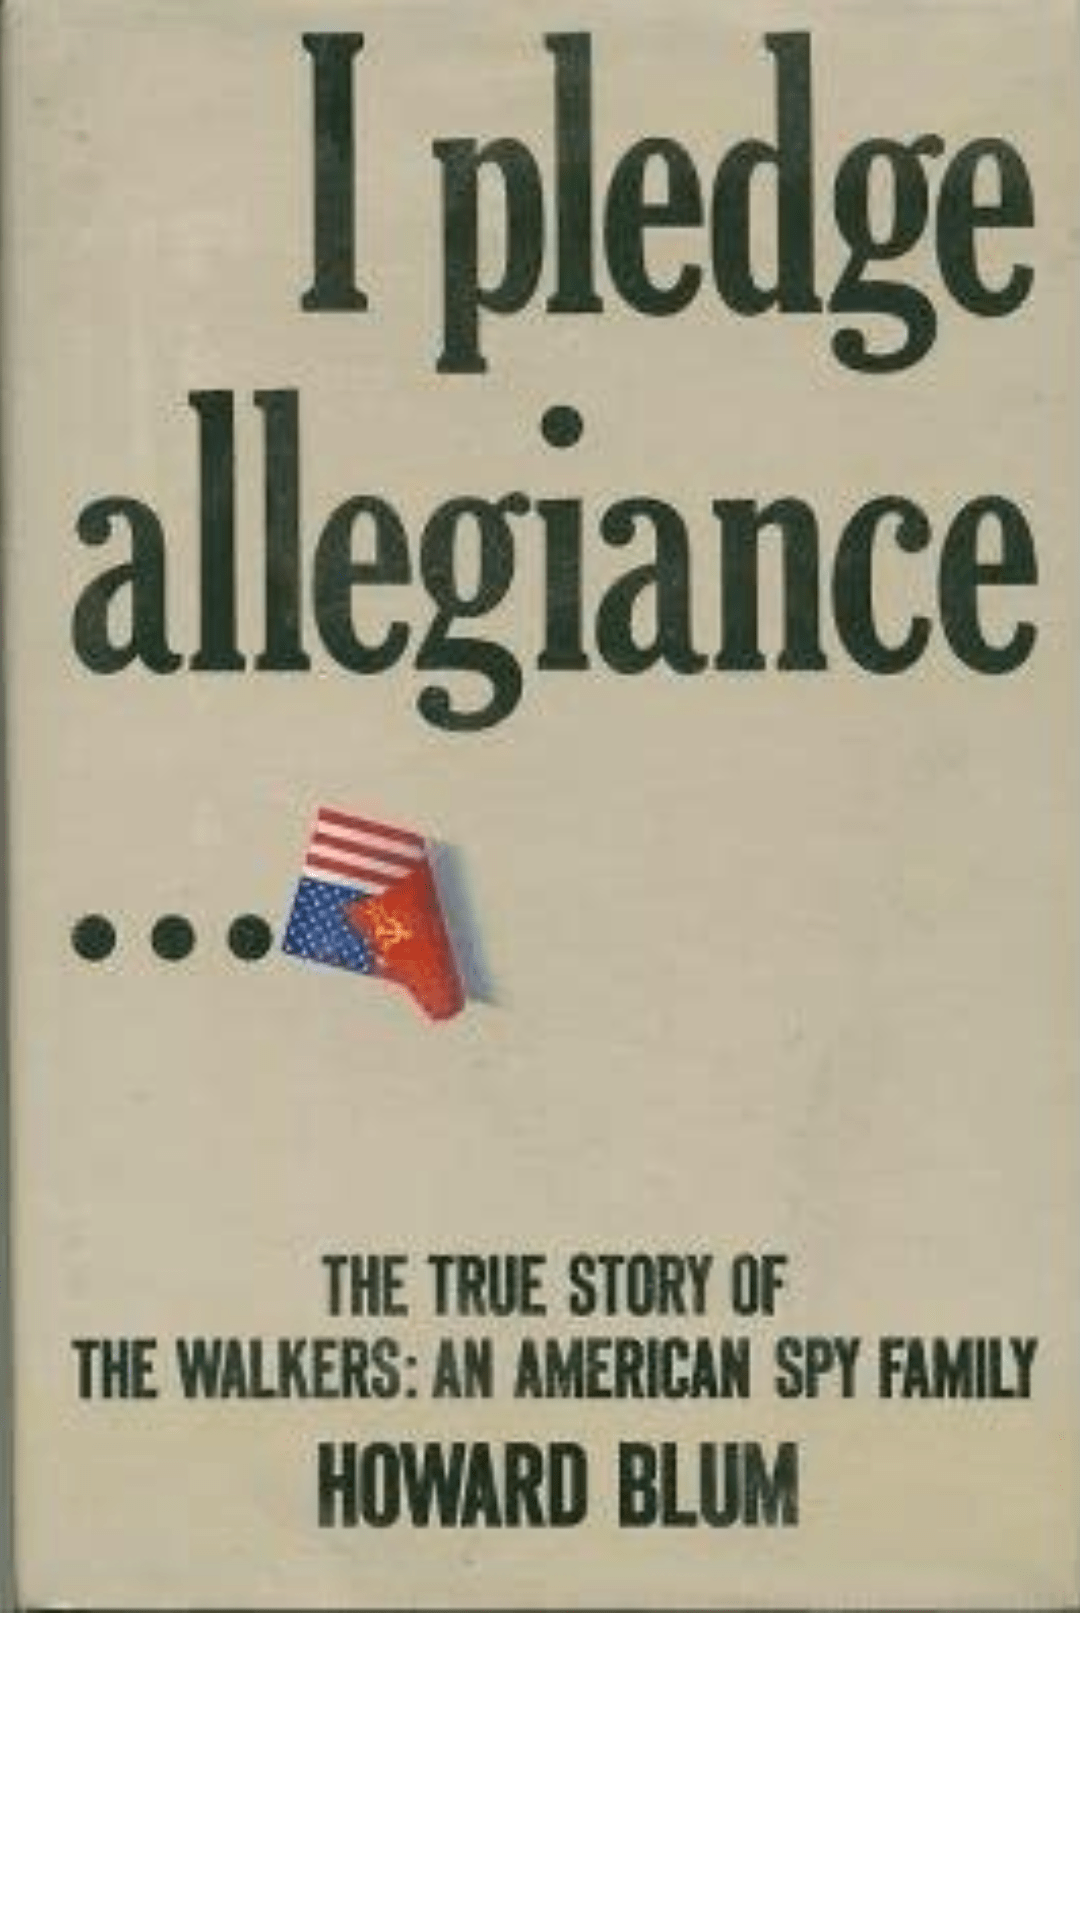 I Pledge Allegiance: The True Story of the Walkers : an American Spy Family